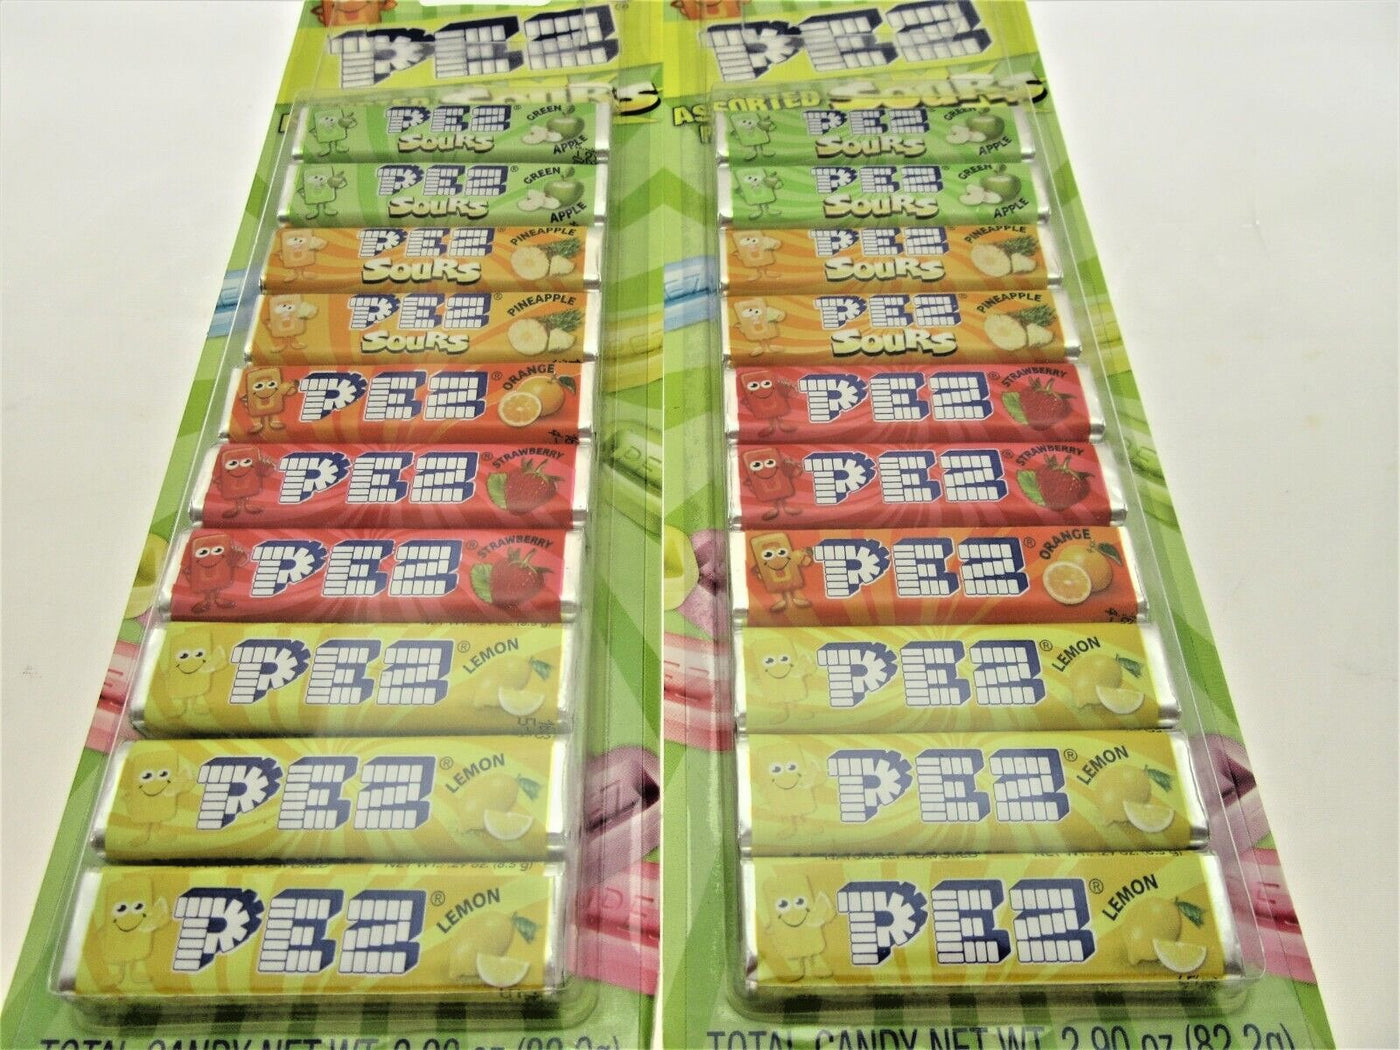 Pez ~ Assorted Fruit And Sours (A) ~ 10 pack 2.9oz ~ Lot of 2